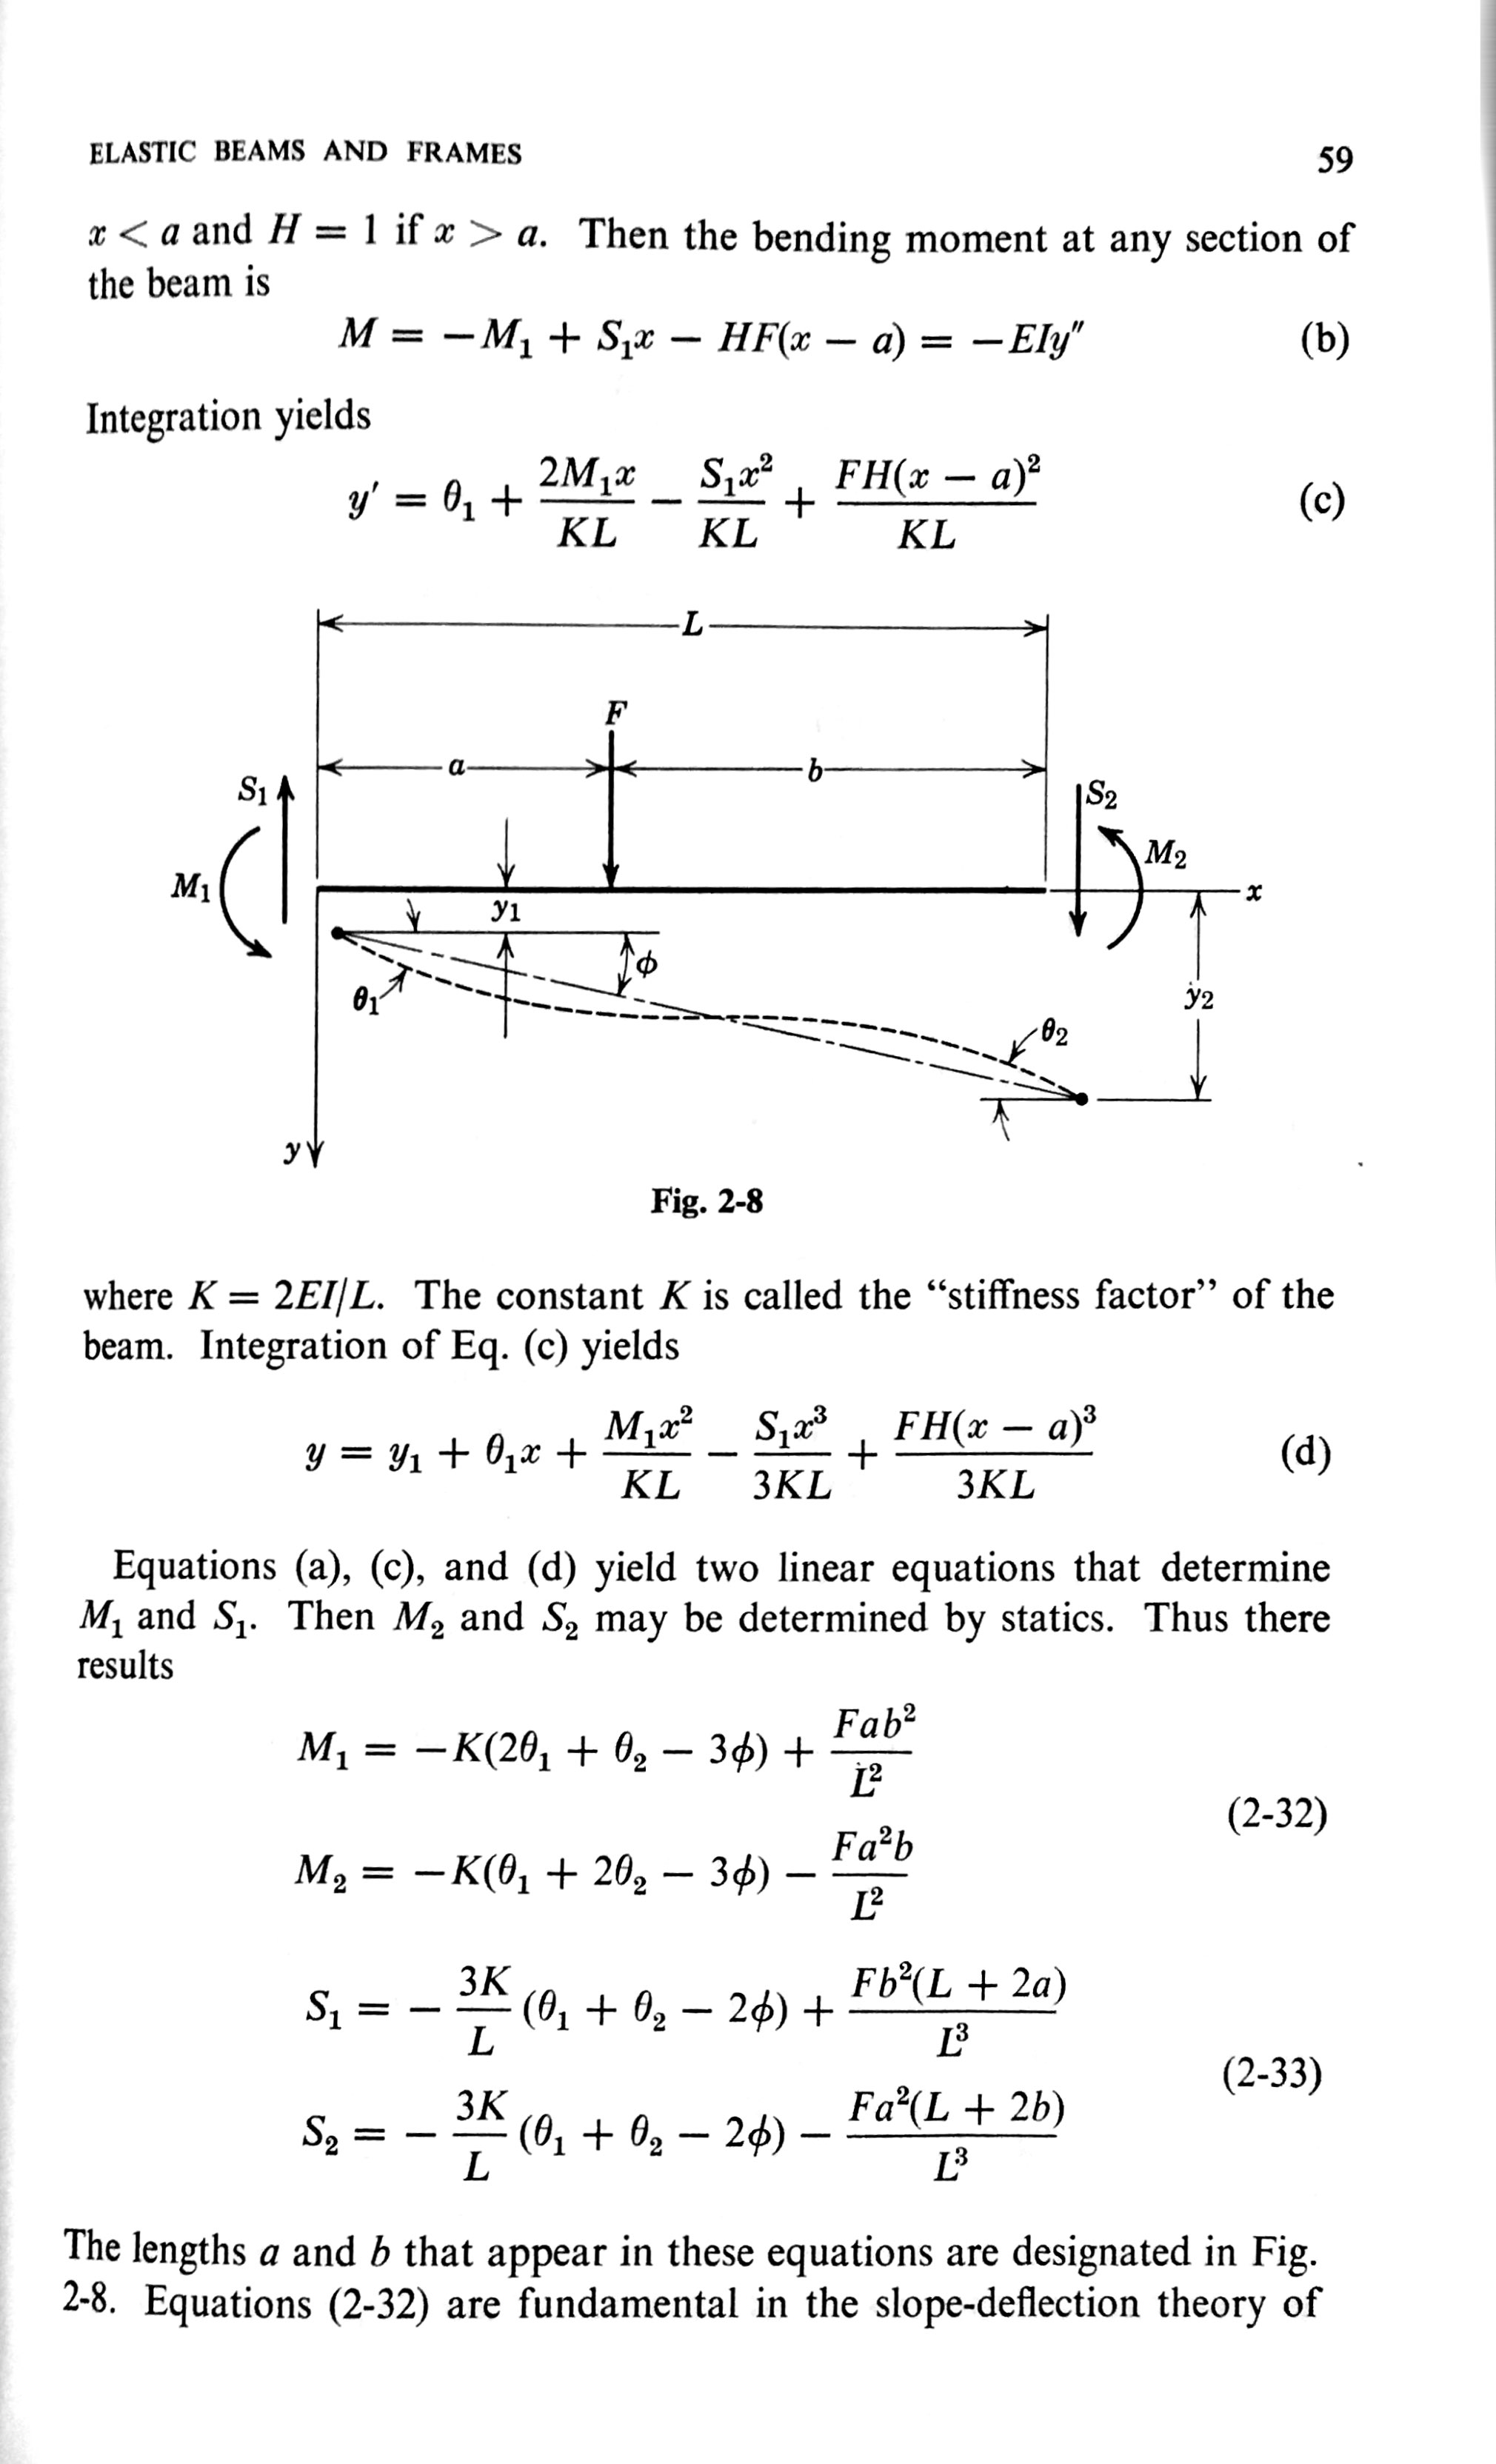 Page of equations from Langhaar